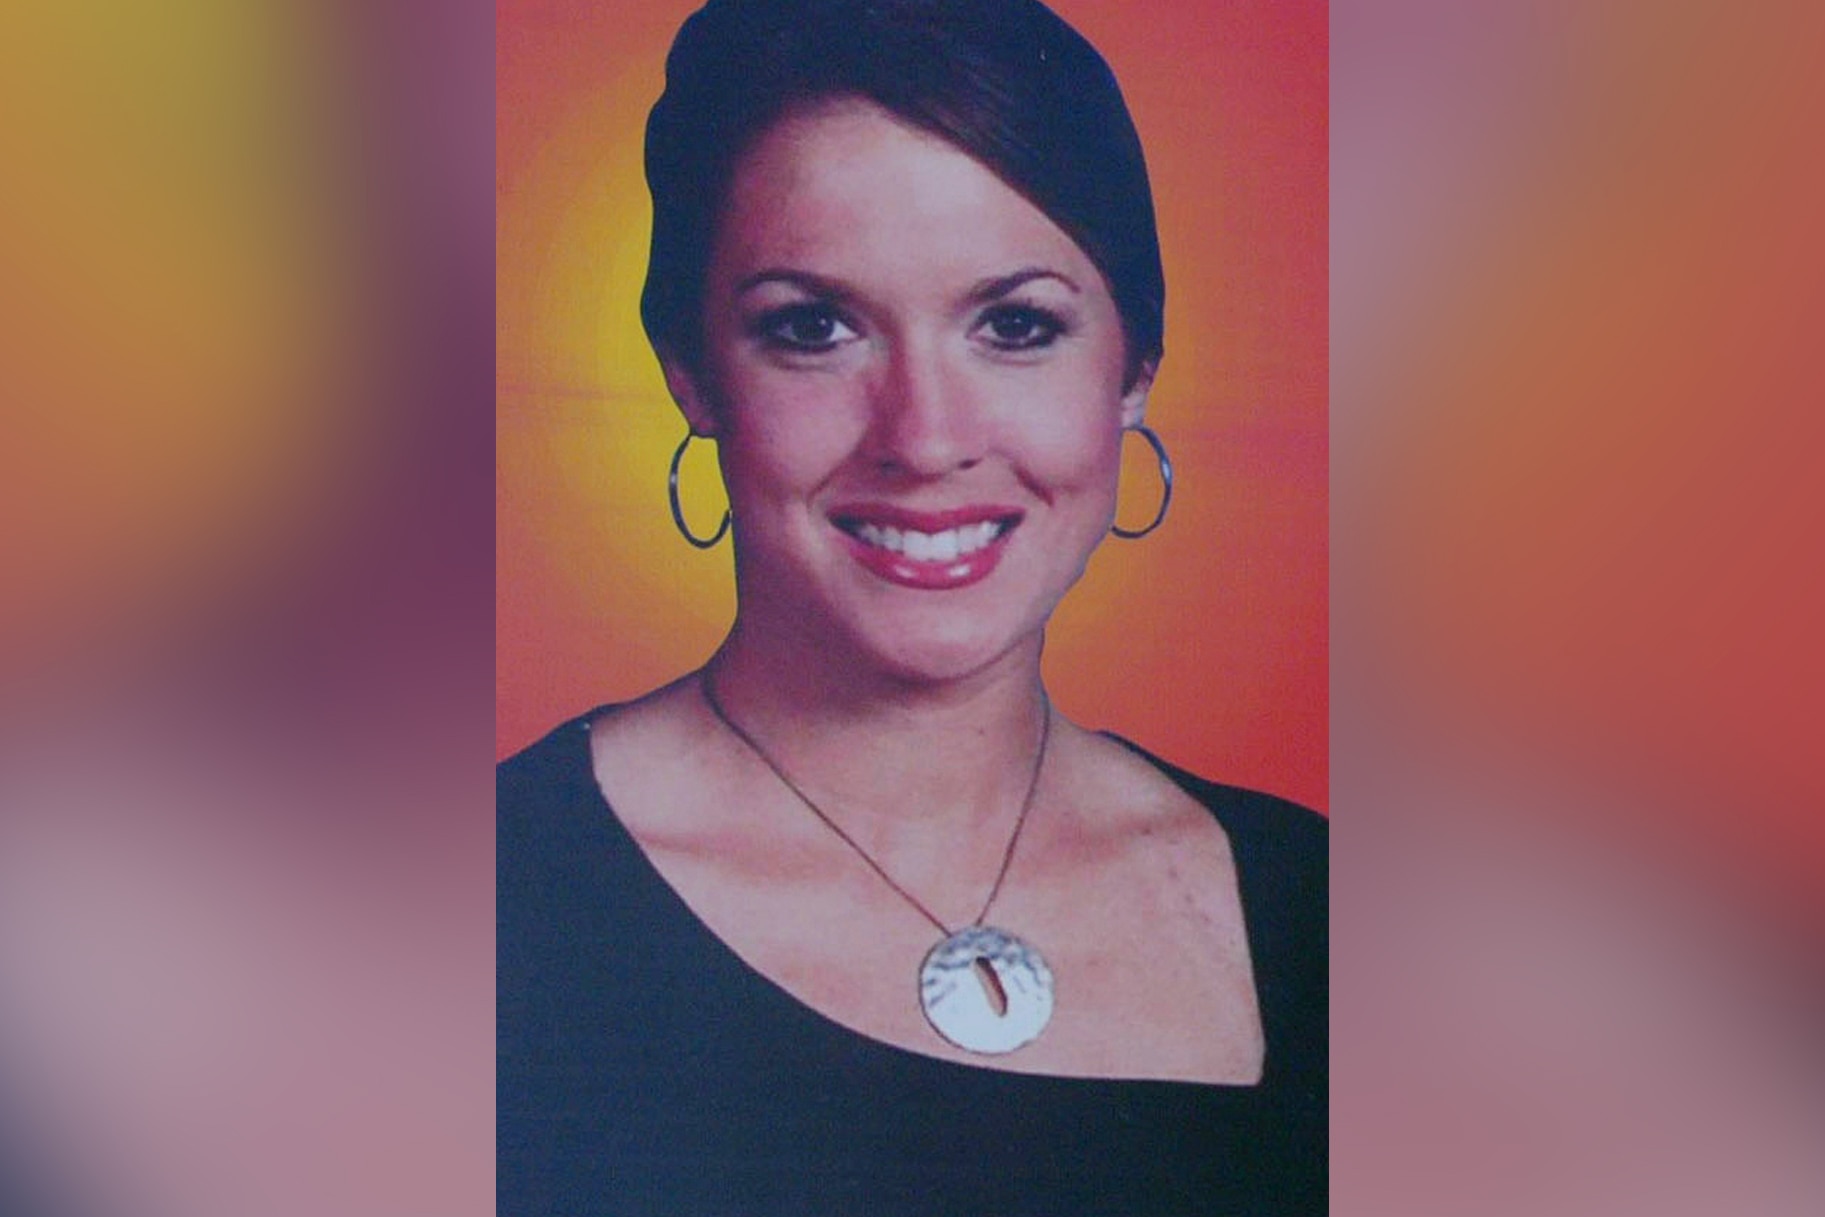 A photo of missing woman Tara Grinstead